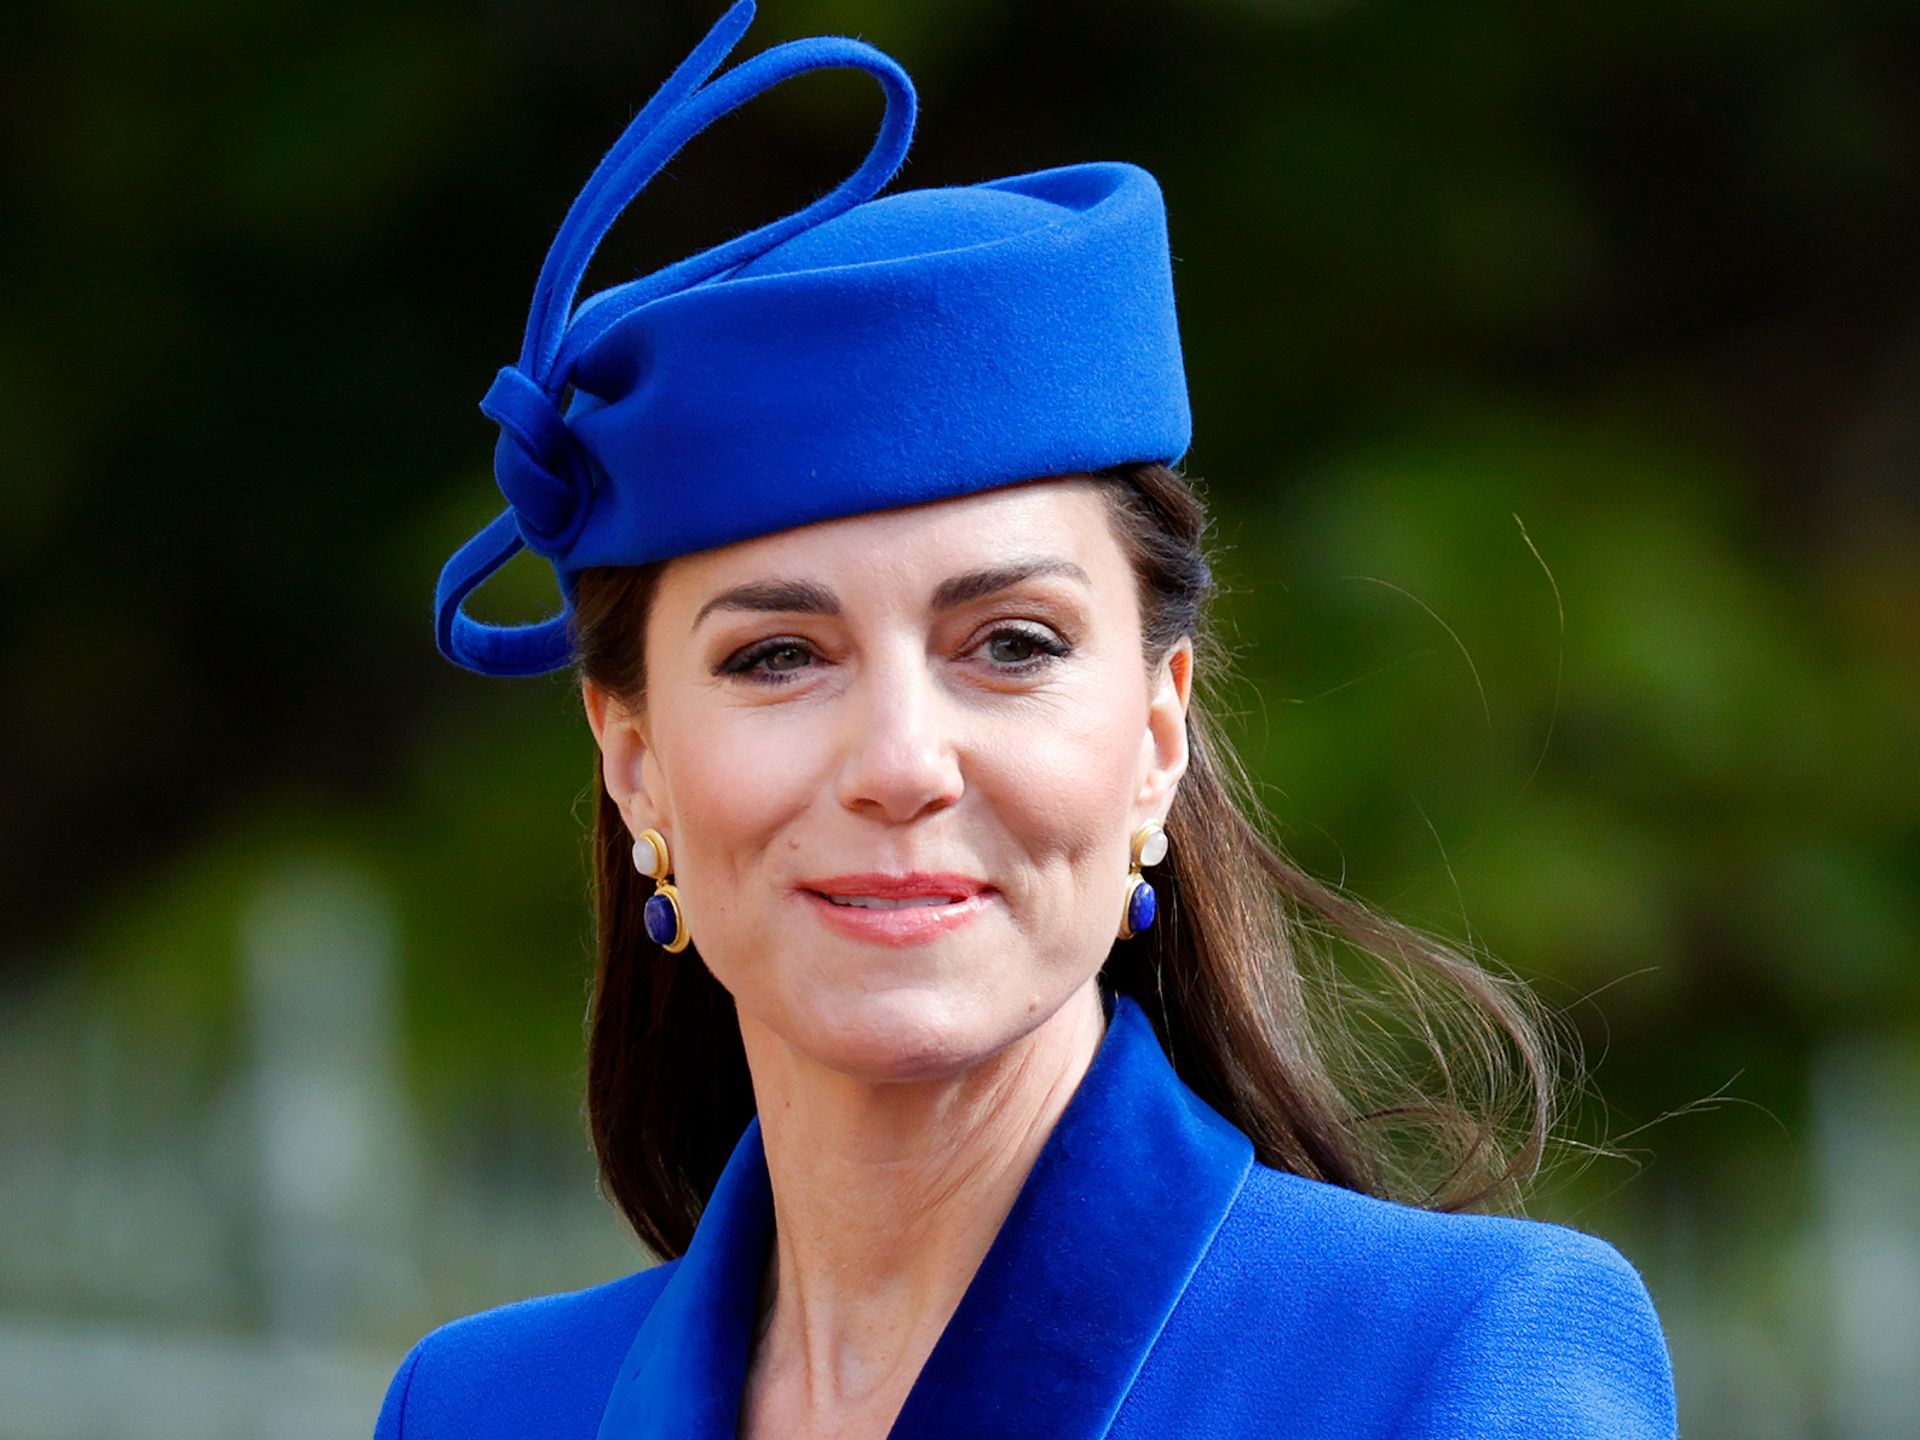 Why Kate Middleton, Prince William and Their Children Always Wear Blue